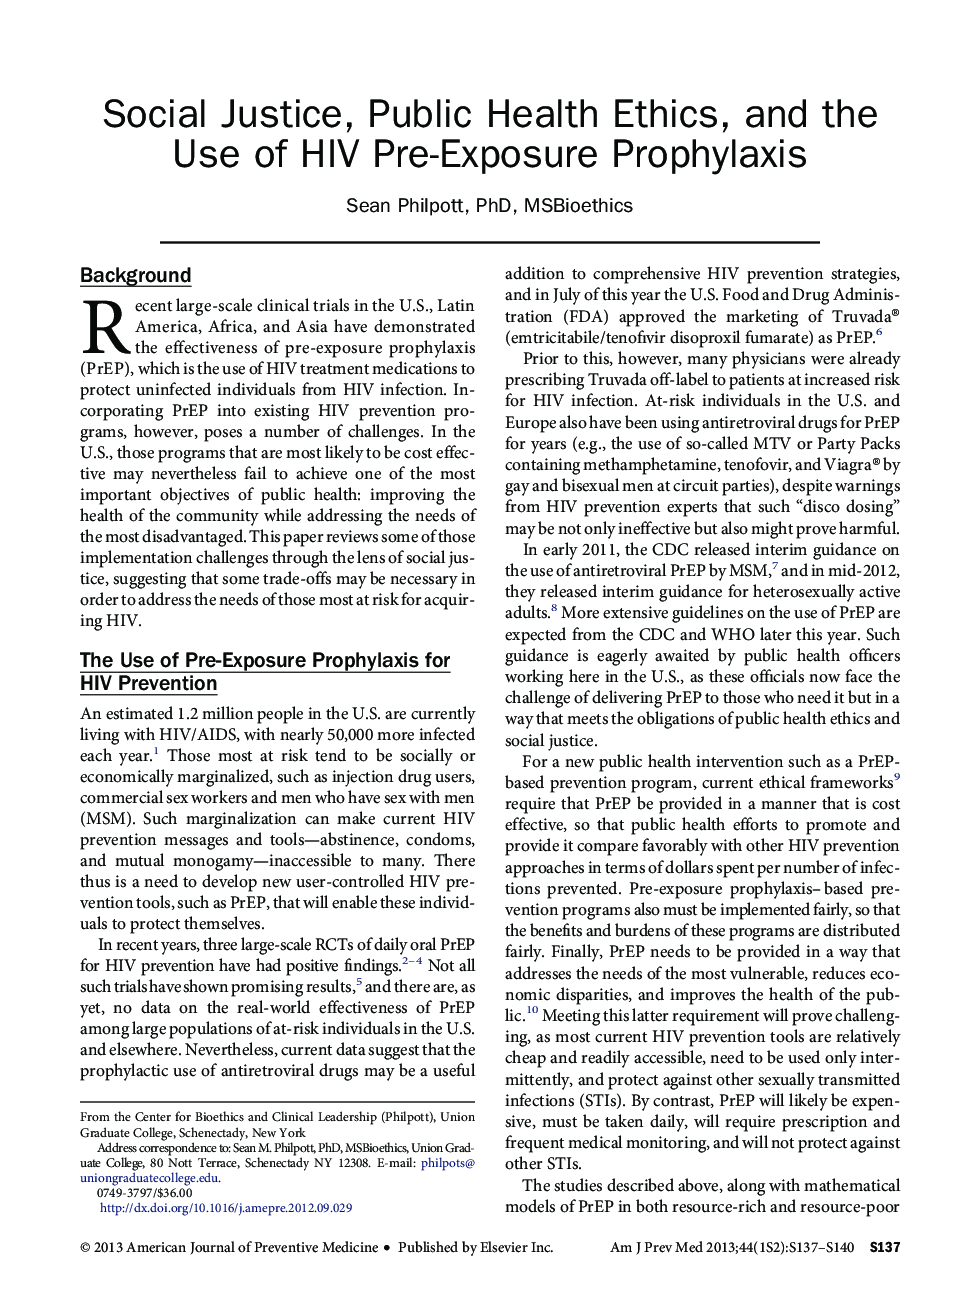 Social Justice, Public Health Ethics, and the Use of HIV Pre-Exposure Prophylaxis